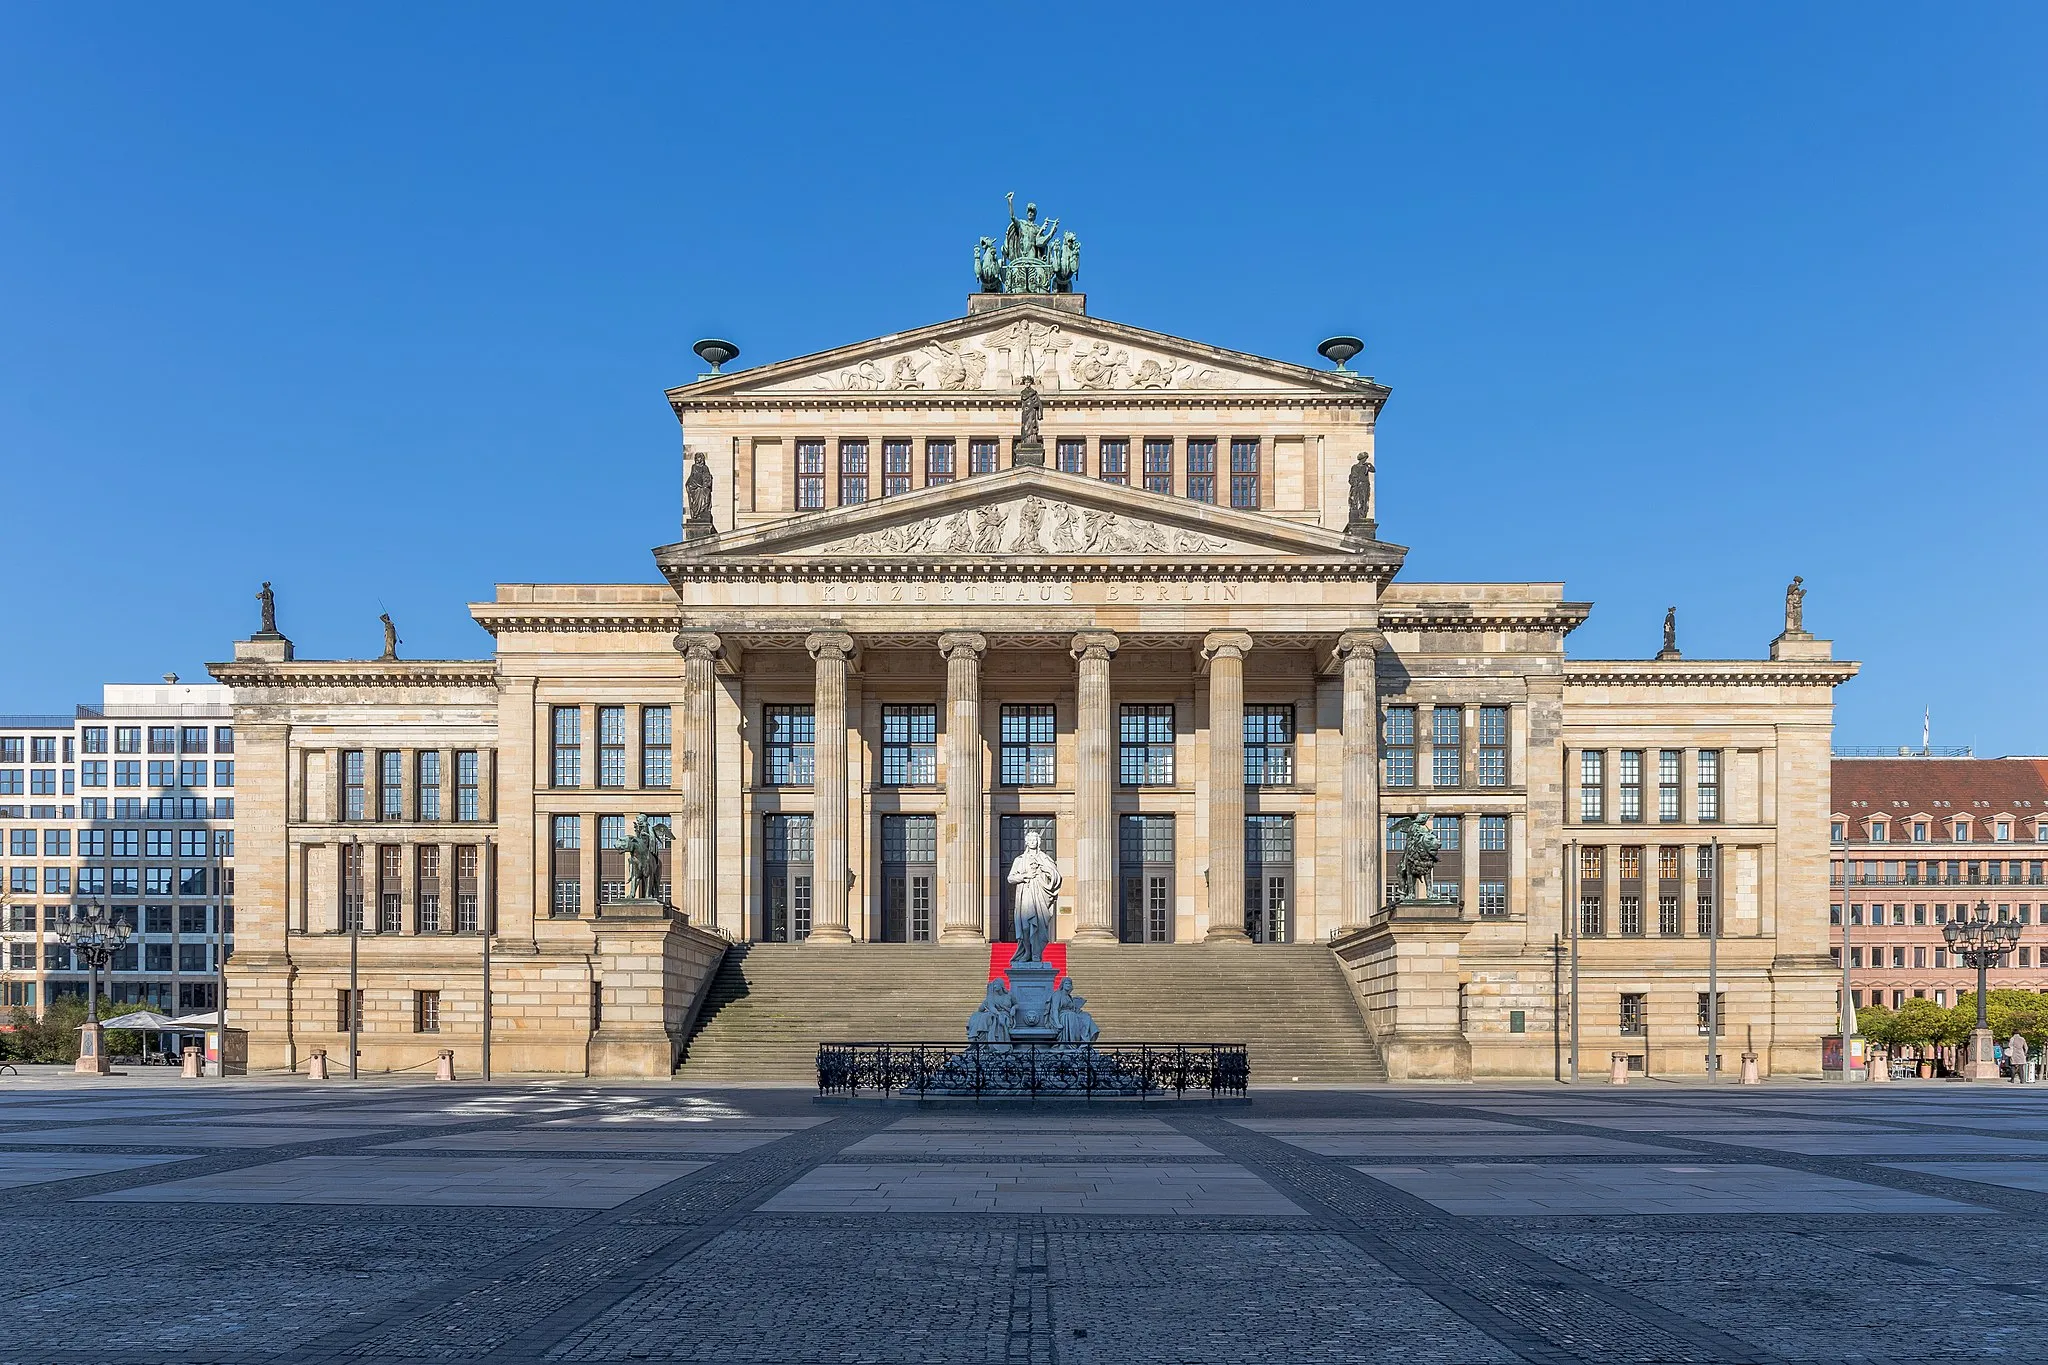 Photo showing: The concert hall is a central building on the Gendarmenmarkt. The classical building is one of the major works of the architect Karl Friedrich Schinkel. It was opened in 1821 as the Royal Playhouse and was from 1919 to 1945 Prussian State Theatre. In 1994, it was named "Konzerthaus Berlin".